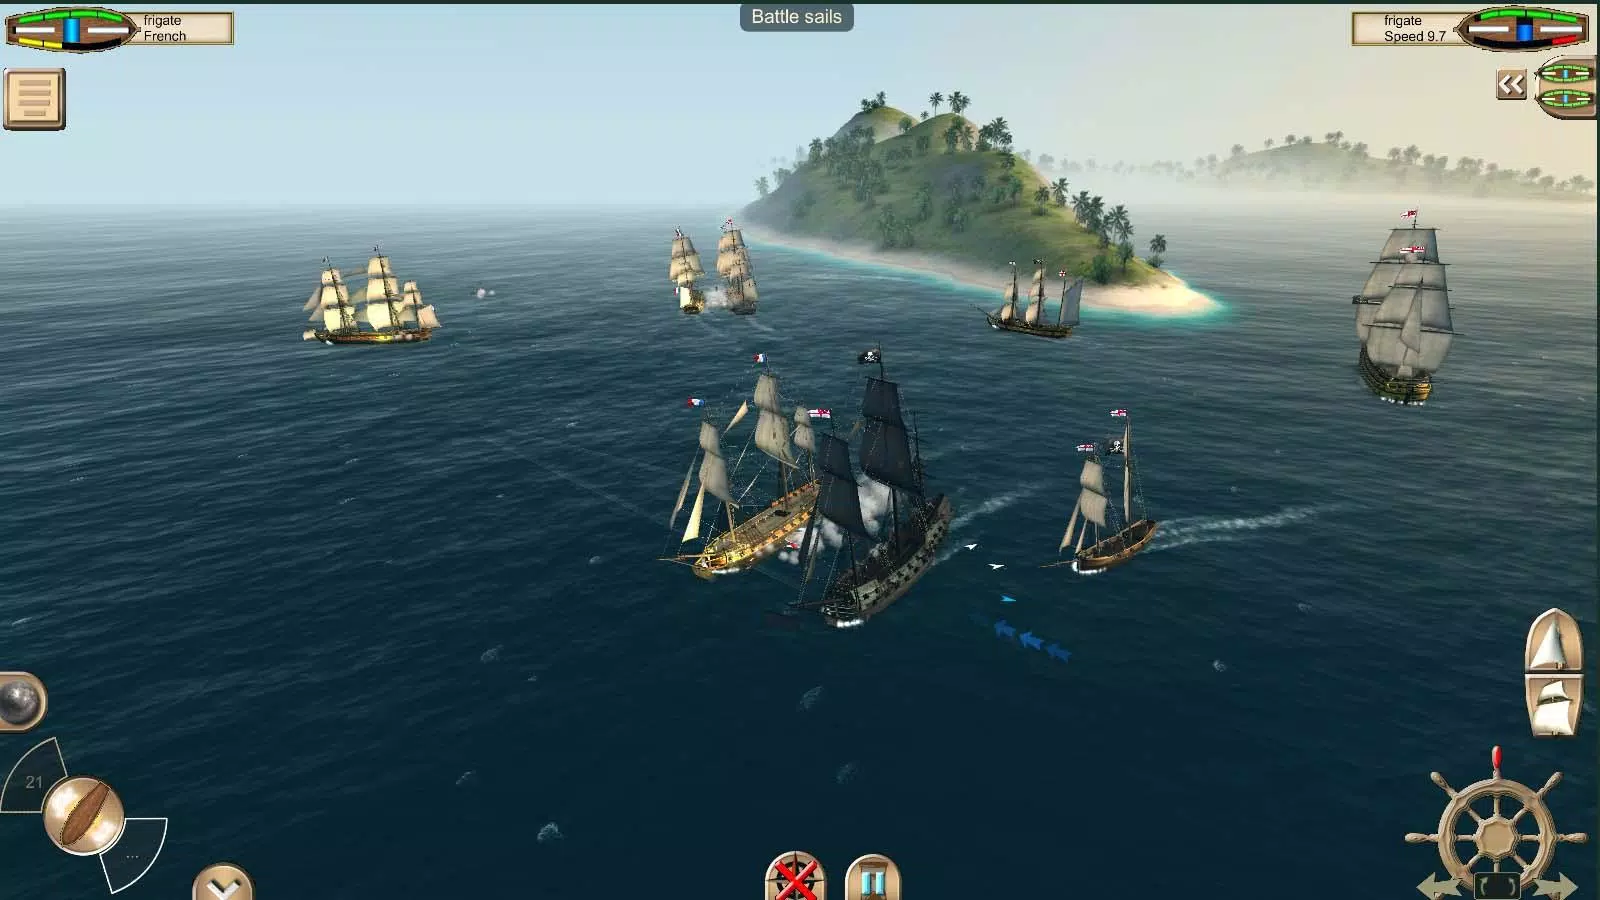 The Pirate: Caribbean Hunt para Android - Baixe o APK na Uptodown